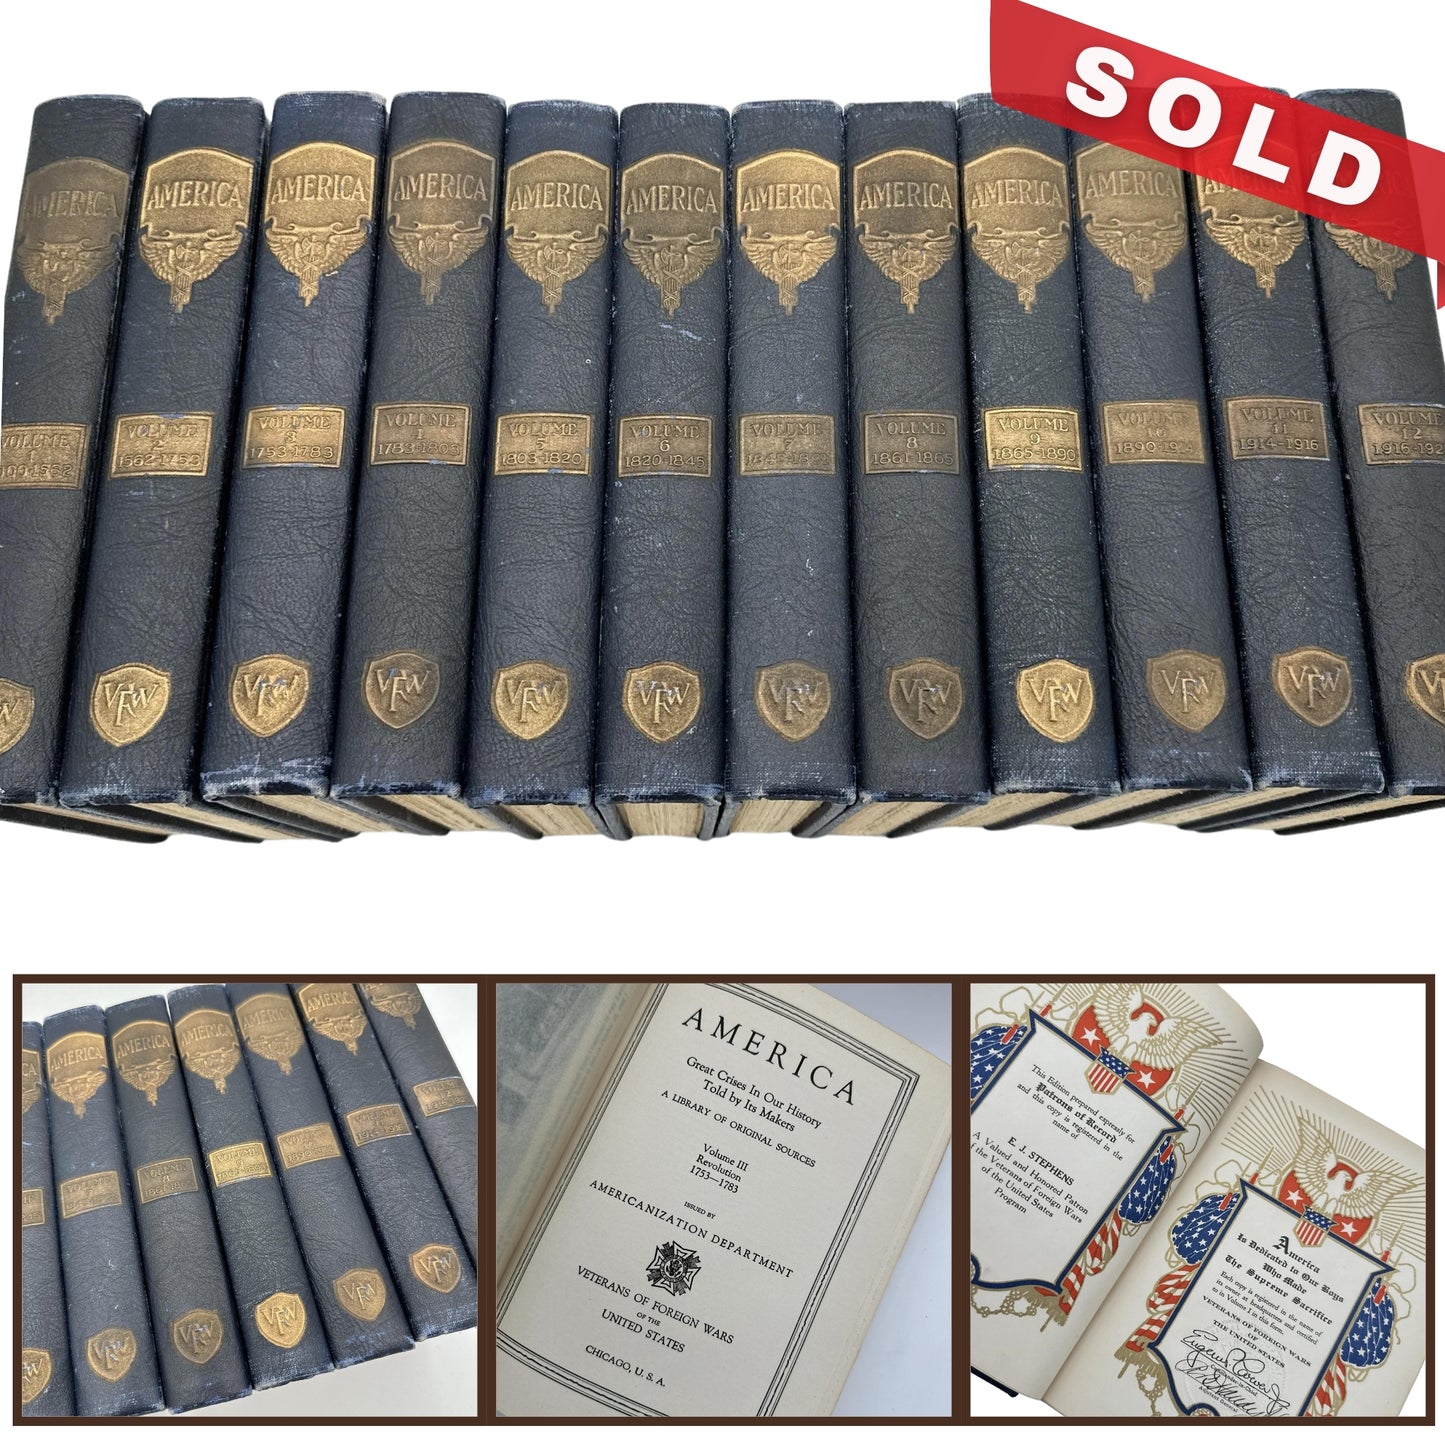 12-volume set, "America: Great Crises In Our History Told by Its Makers" — Complete set in excellent condition